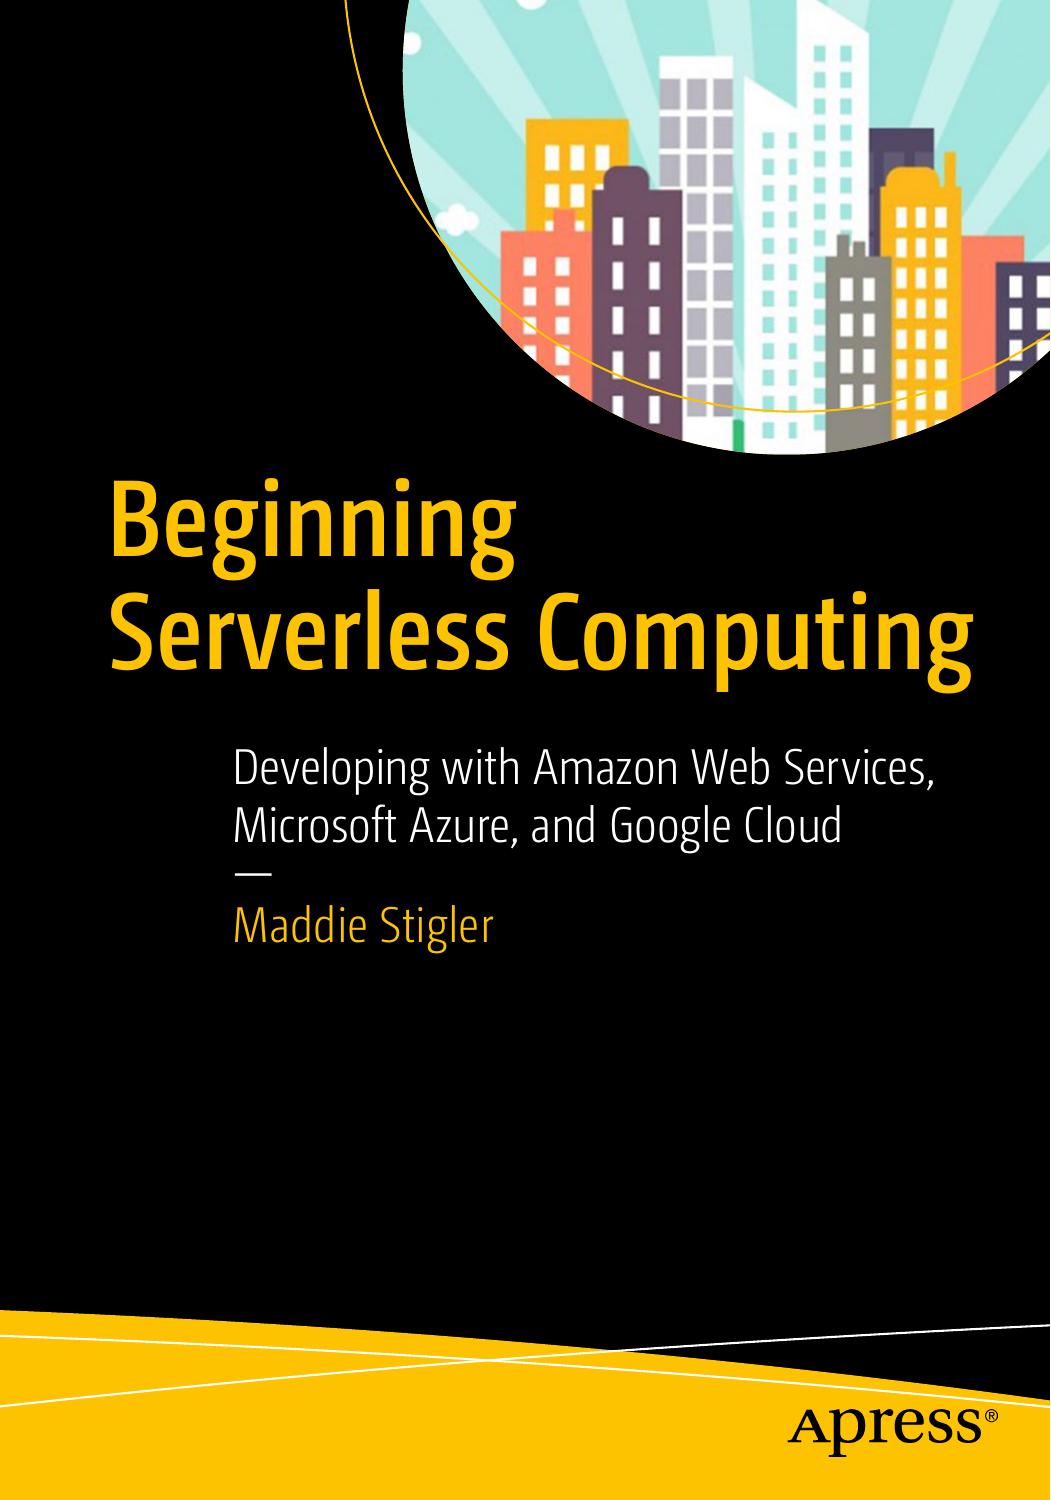 Beginning Serverless Computing Developing with Amazon Web Services, Microsoft Azure, and Google Cloud by